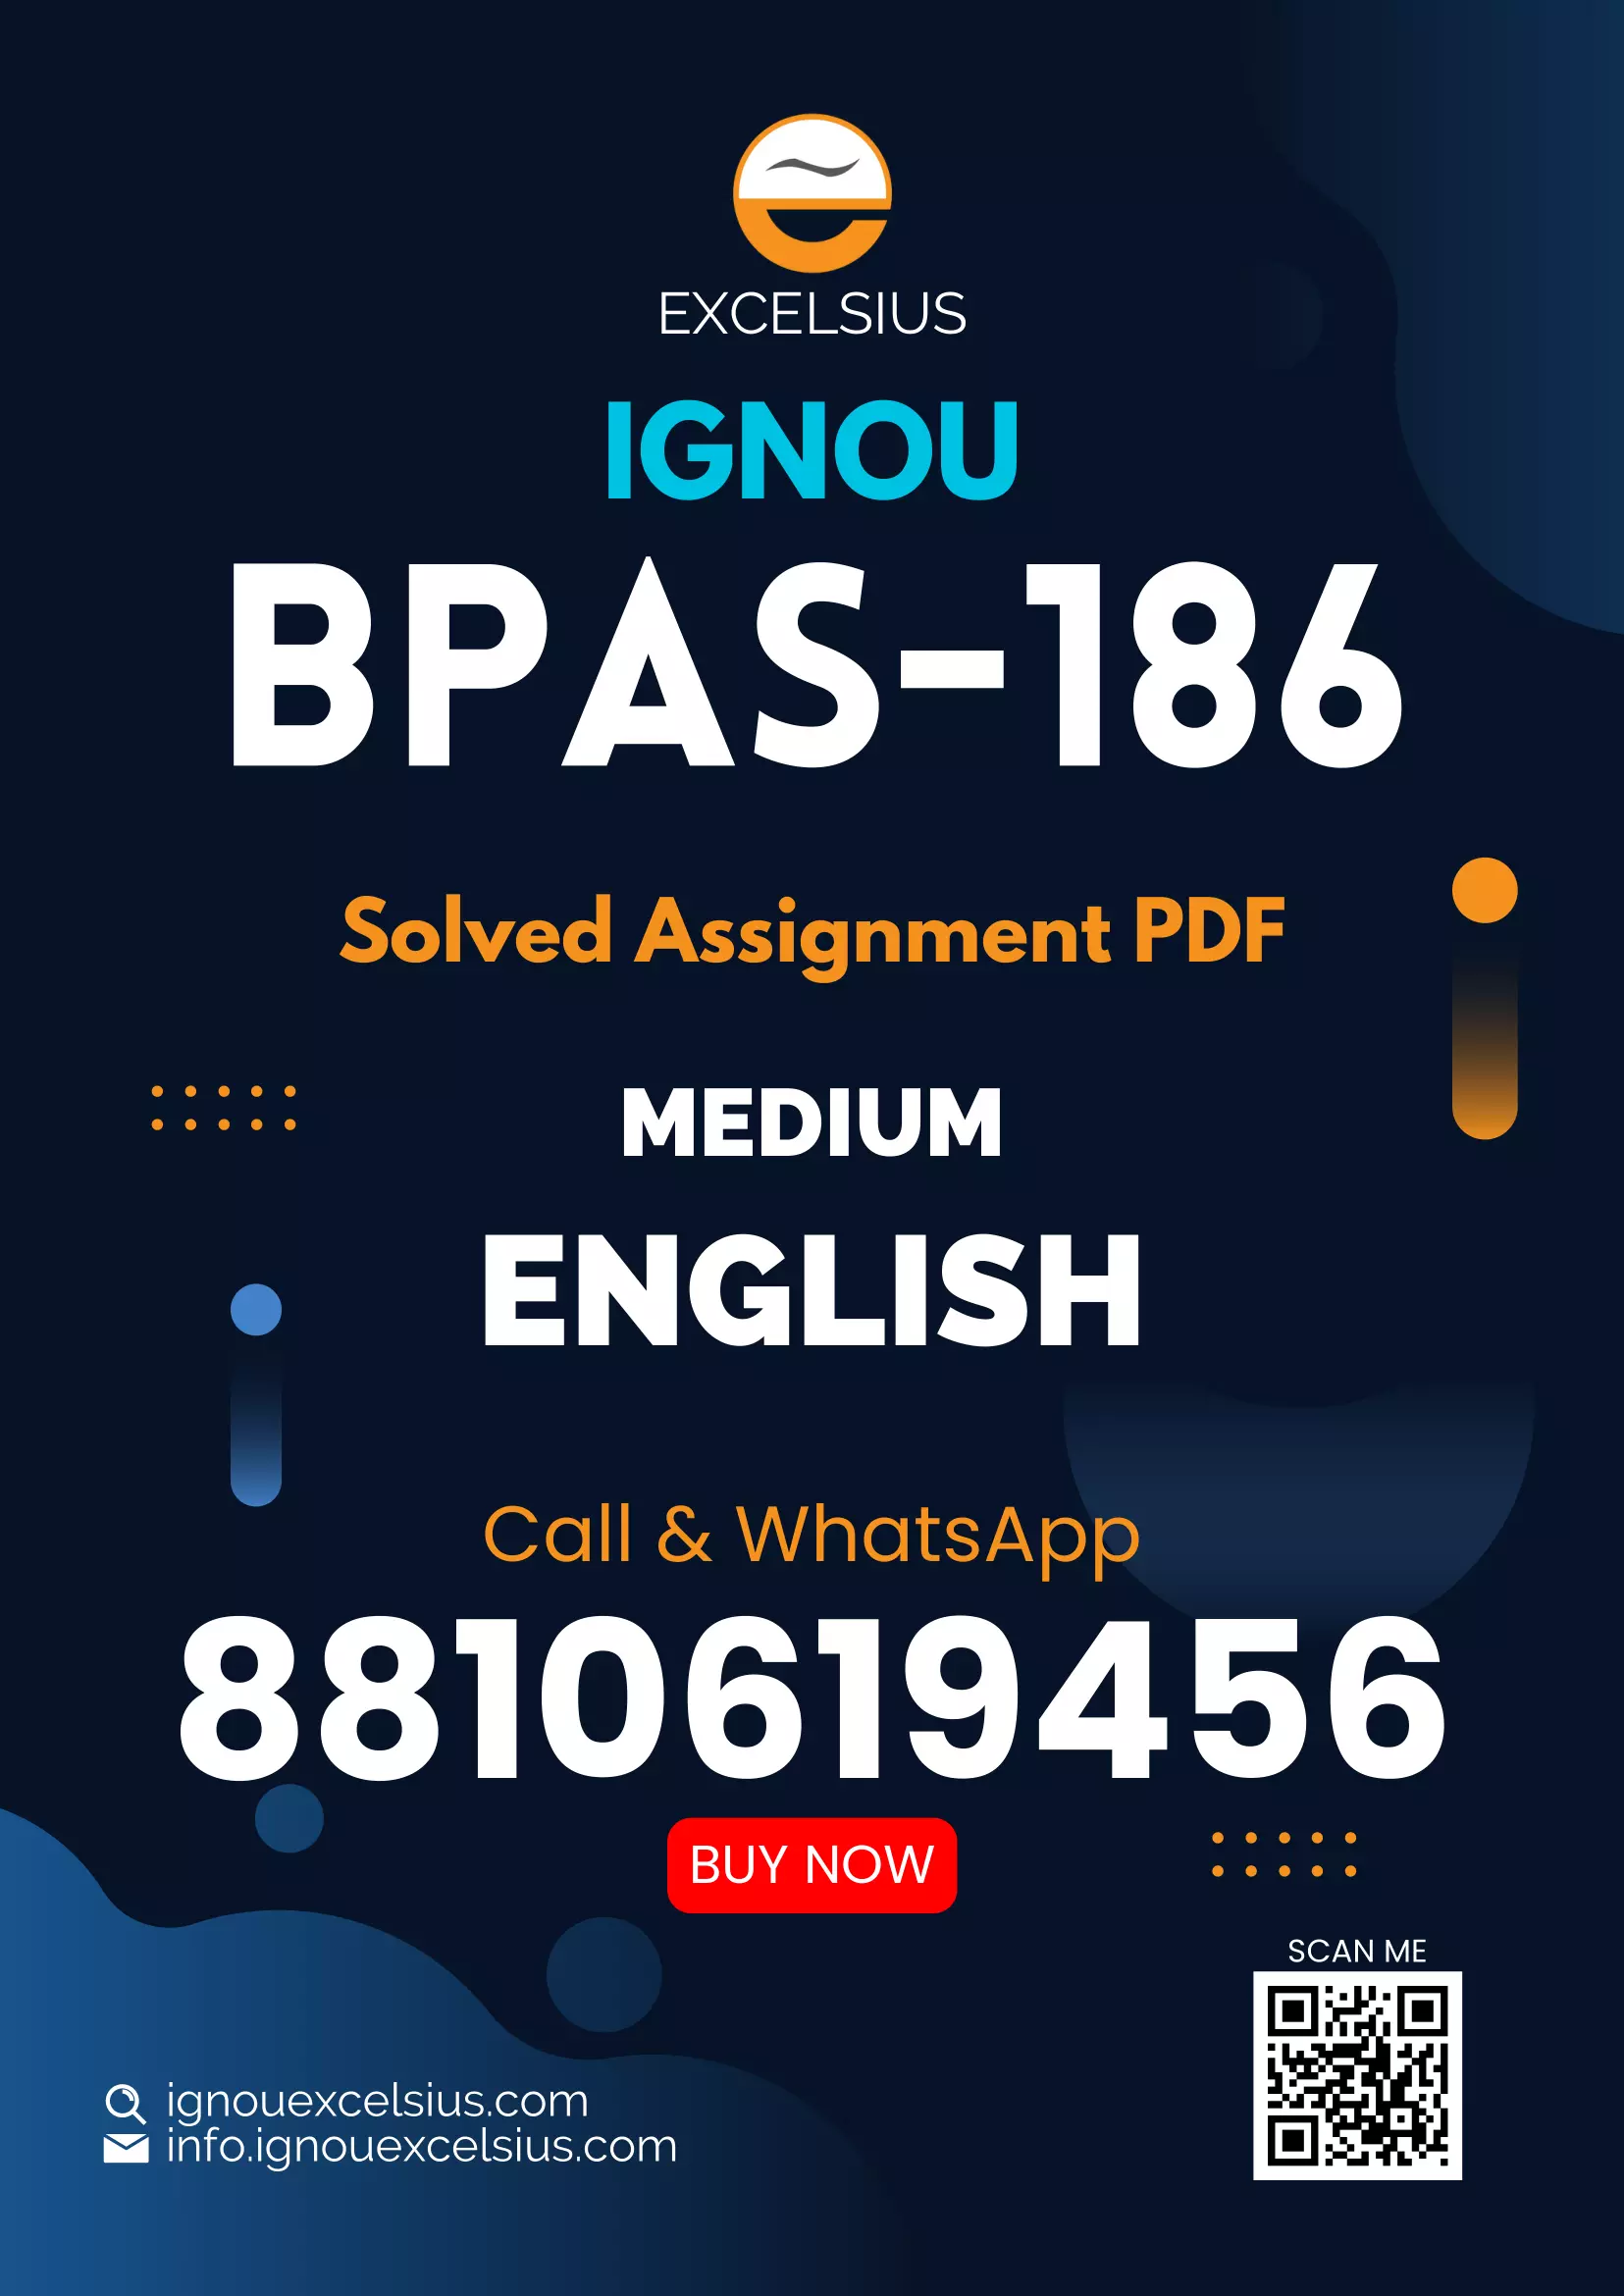 IGNOU BPAS-186 - Stress and Time Management, Latest Solved Assignment-July 2022 – January 2023